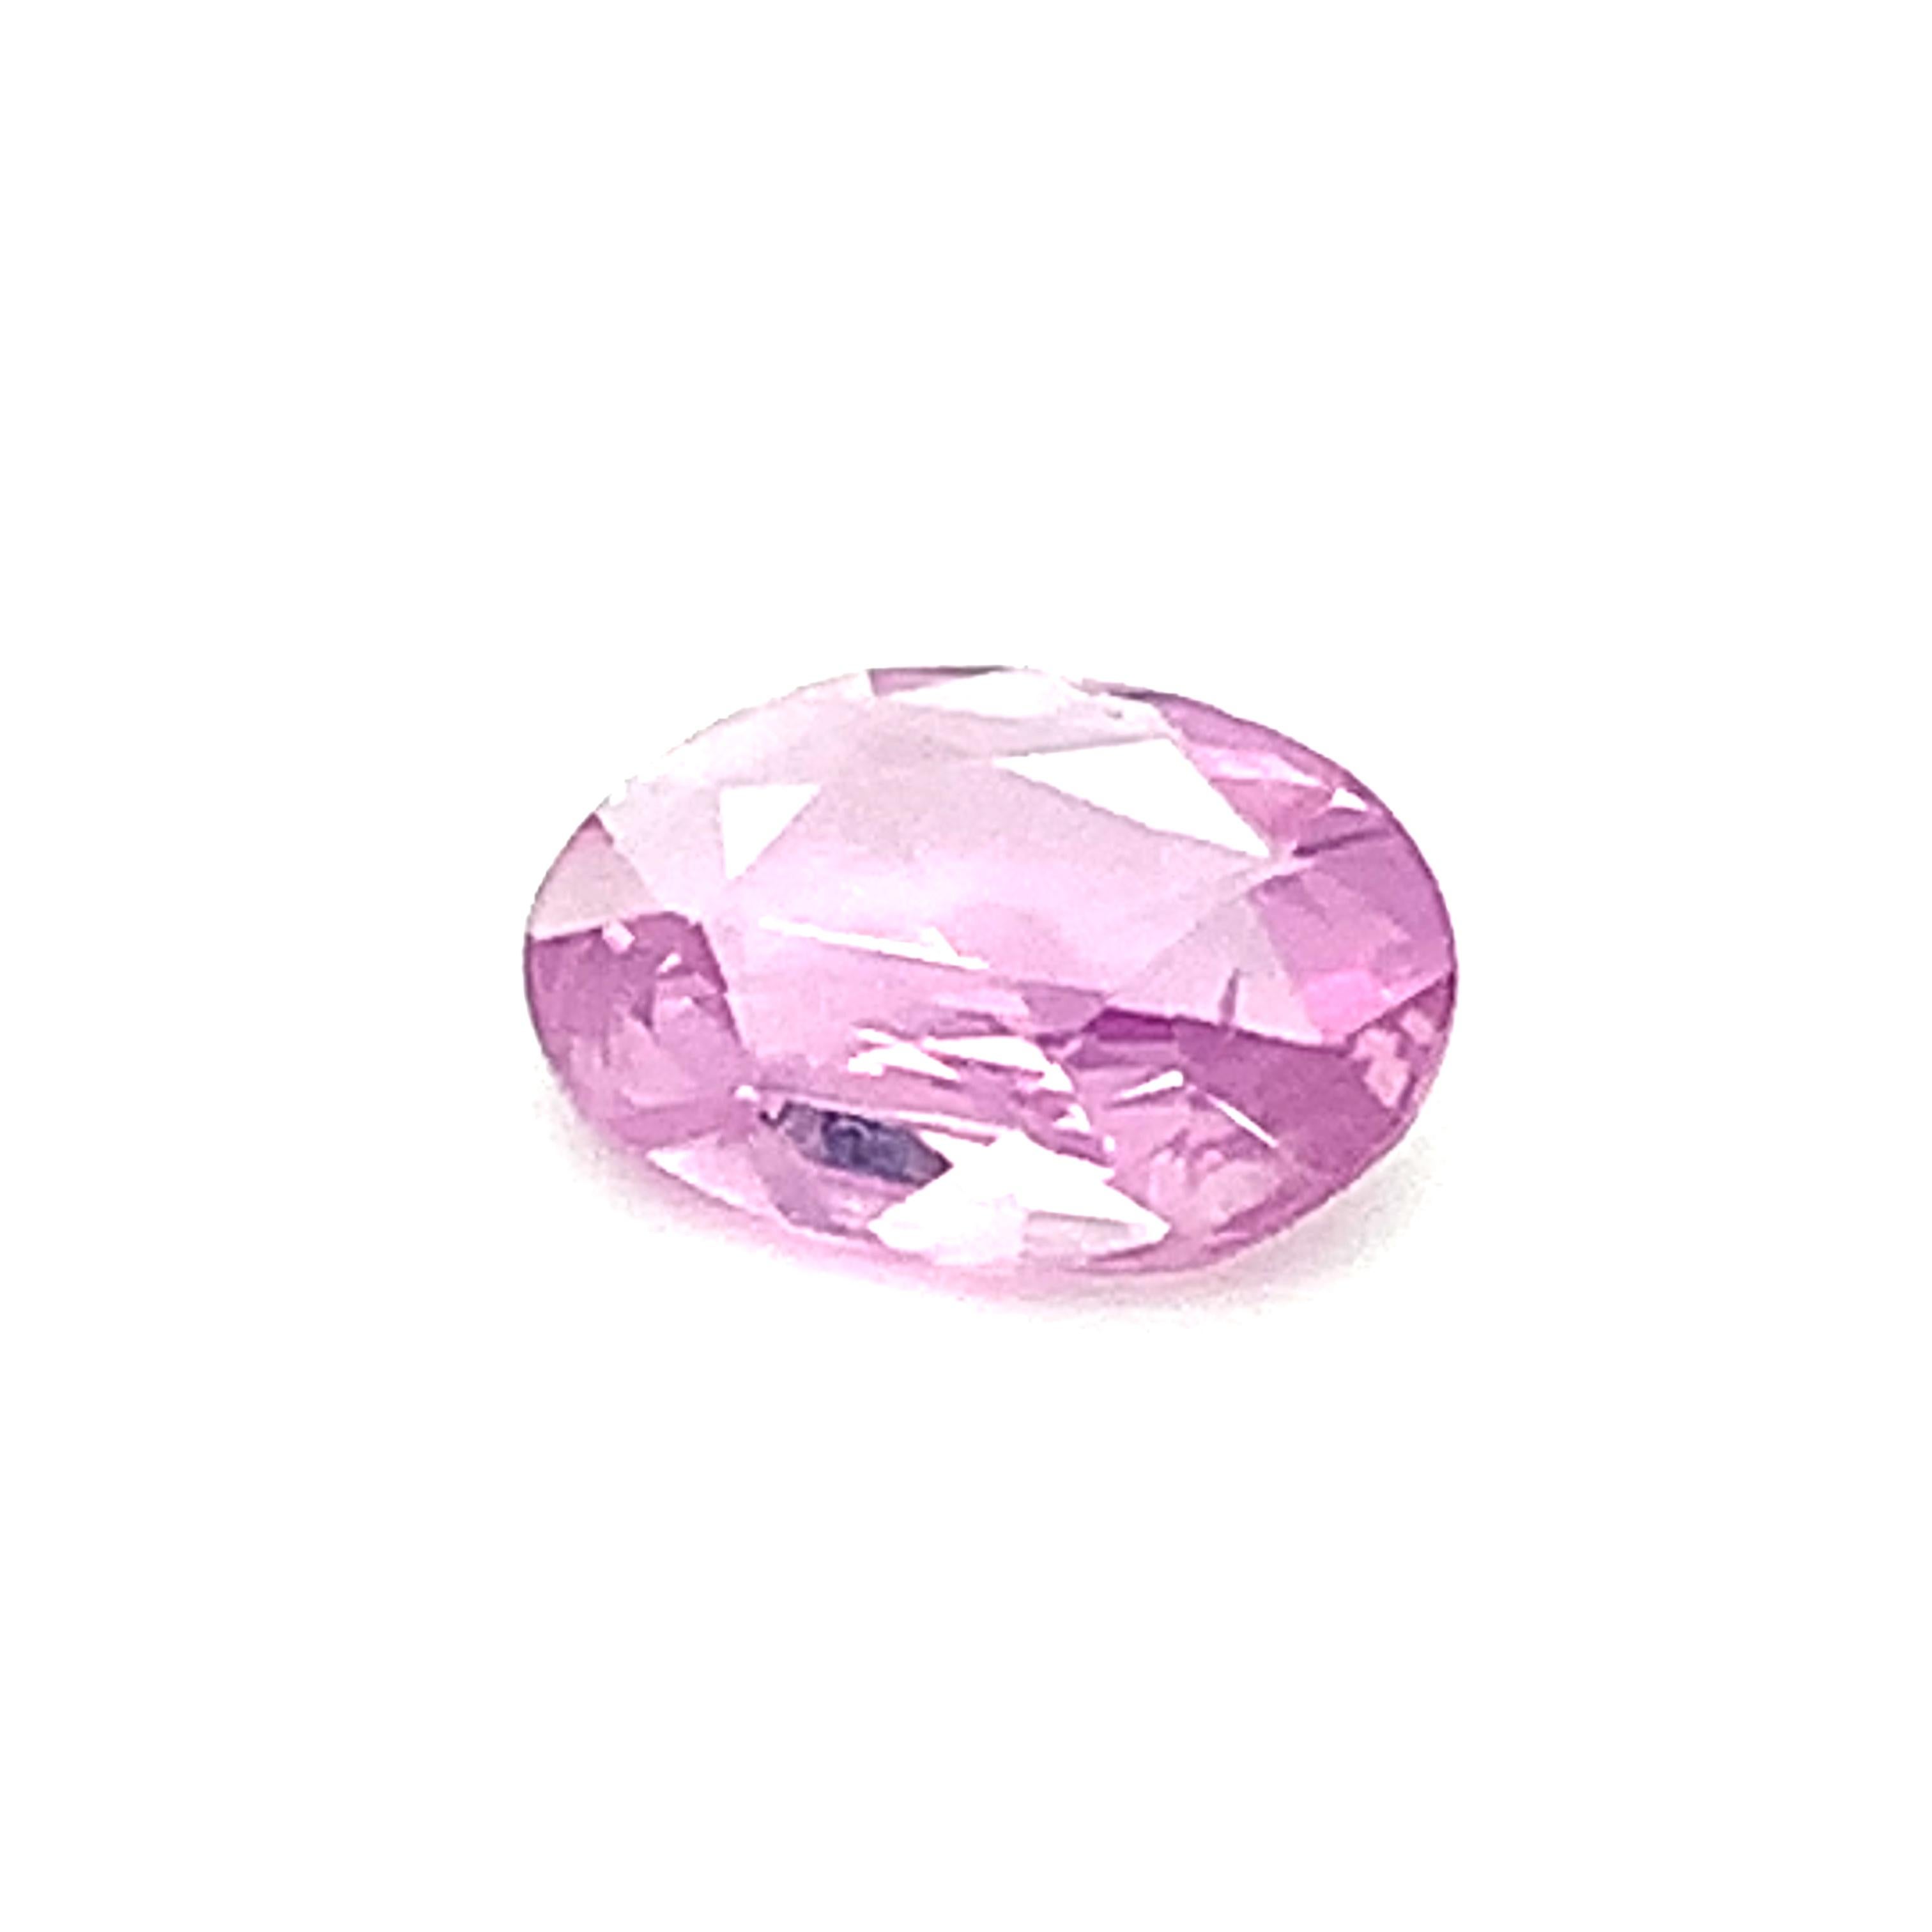 2.95 Ct. Pink Sapphire Oval GIA, Unset 3-Stone Engagement Ring or Pendant Gem 1